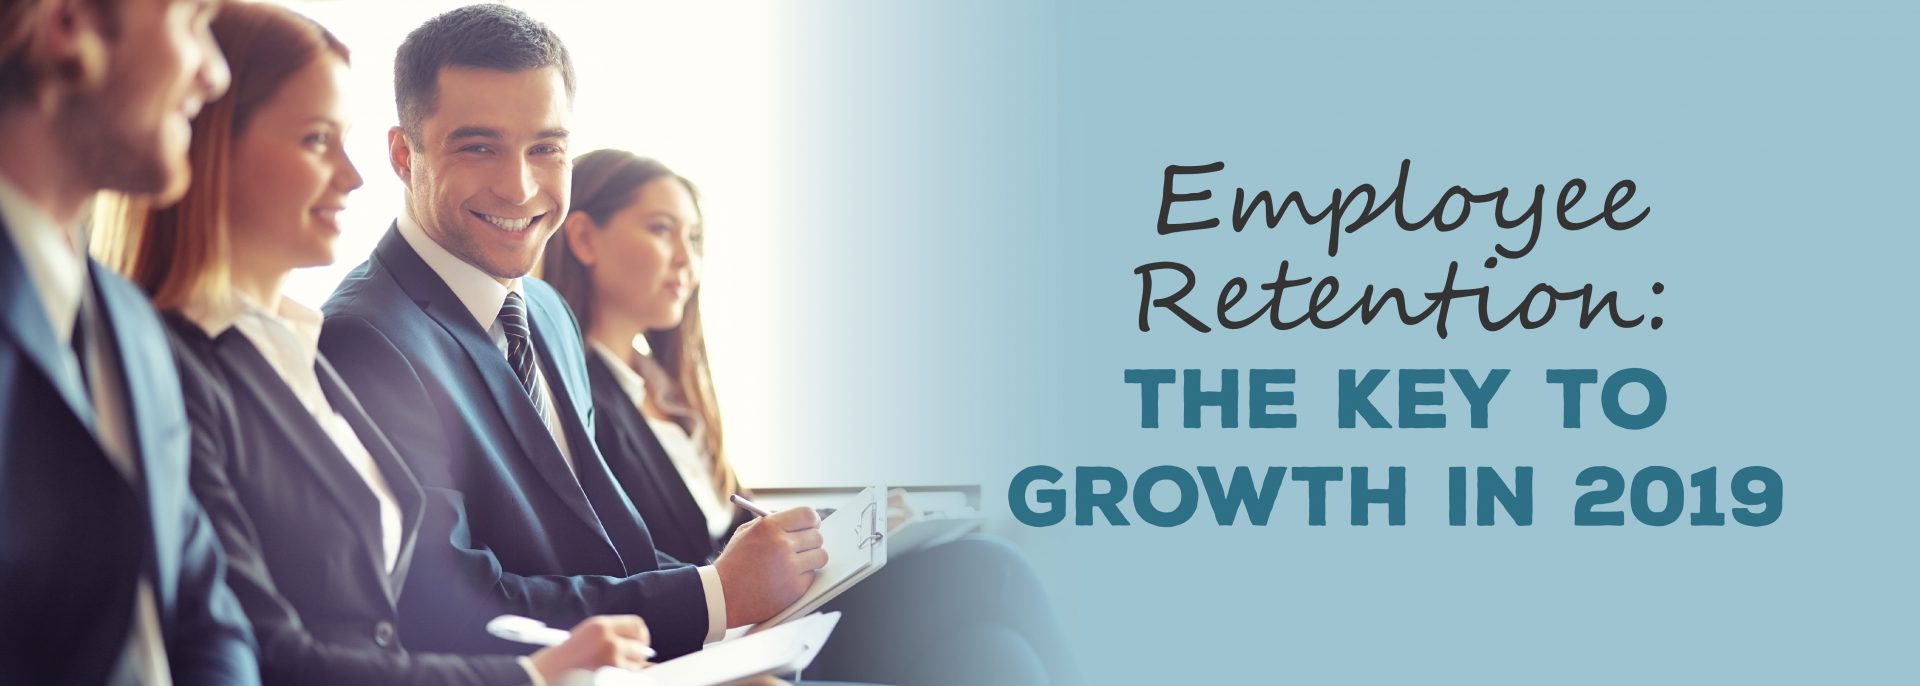 Employee Retention: The Key to Growth in 2019 ADI Agency